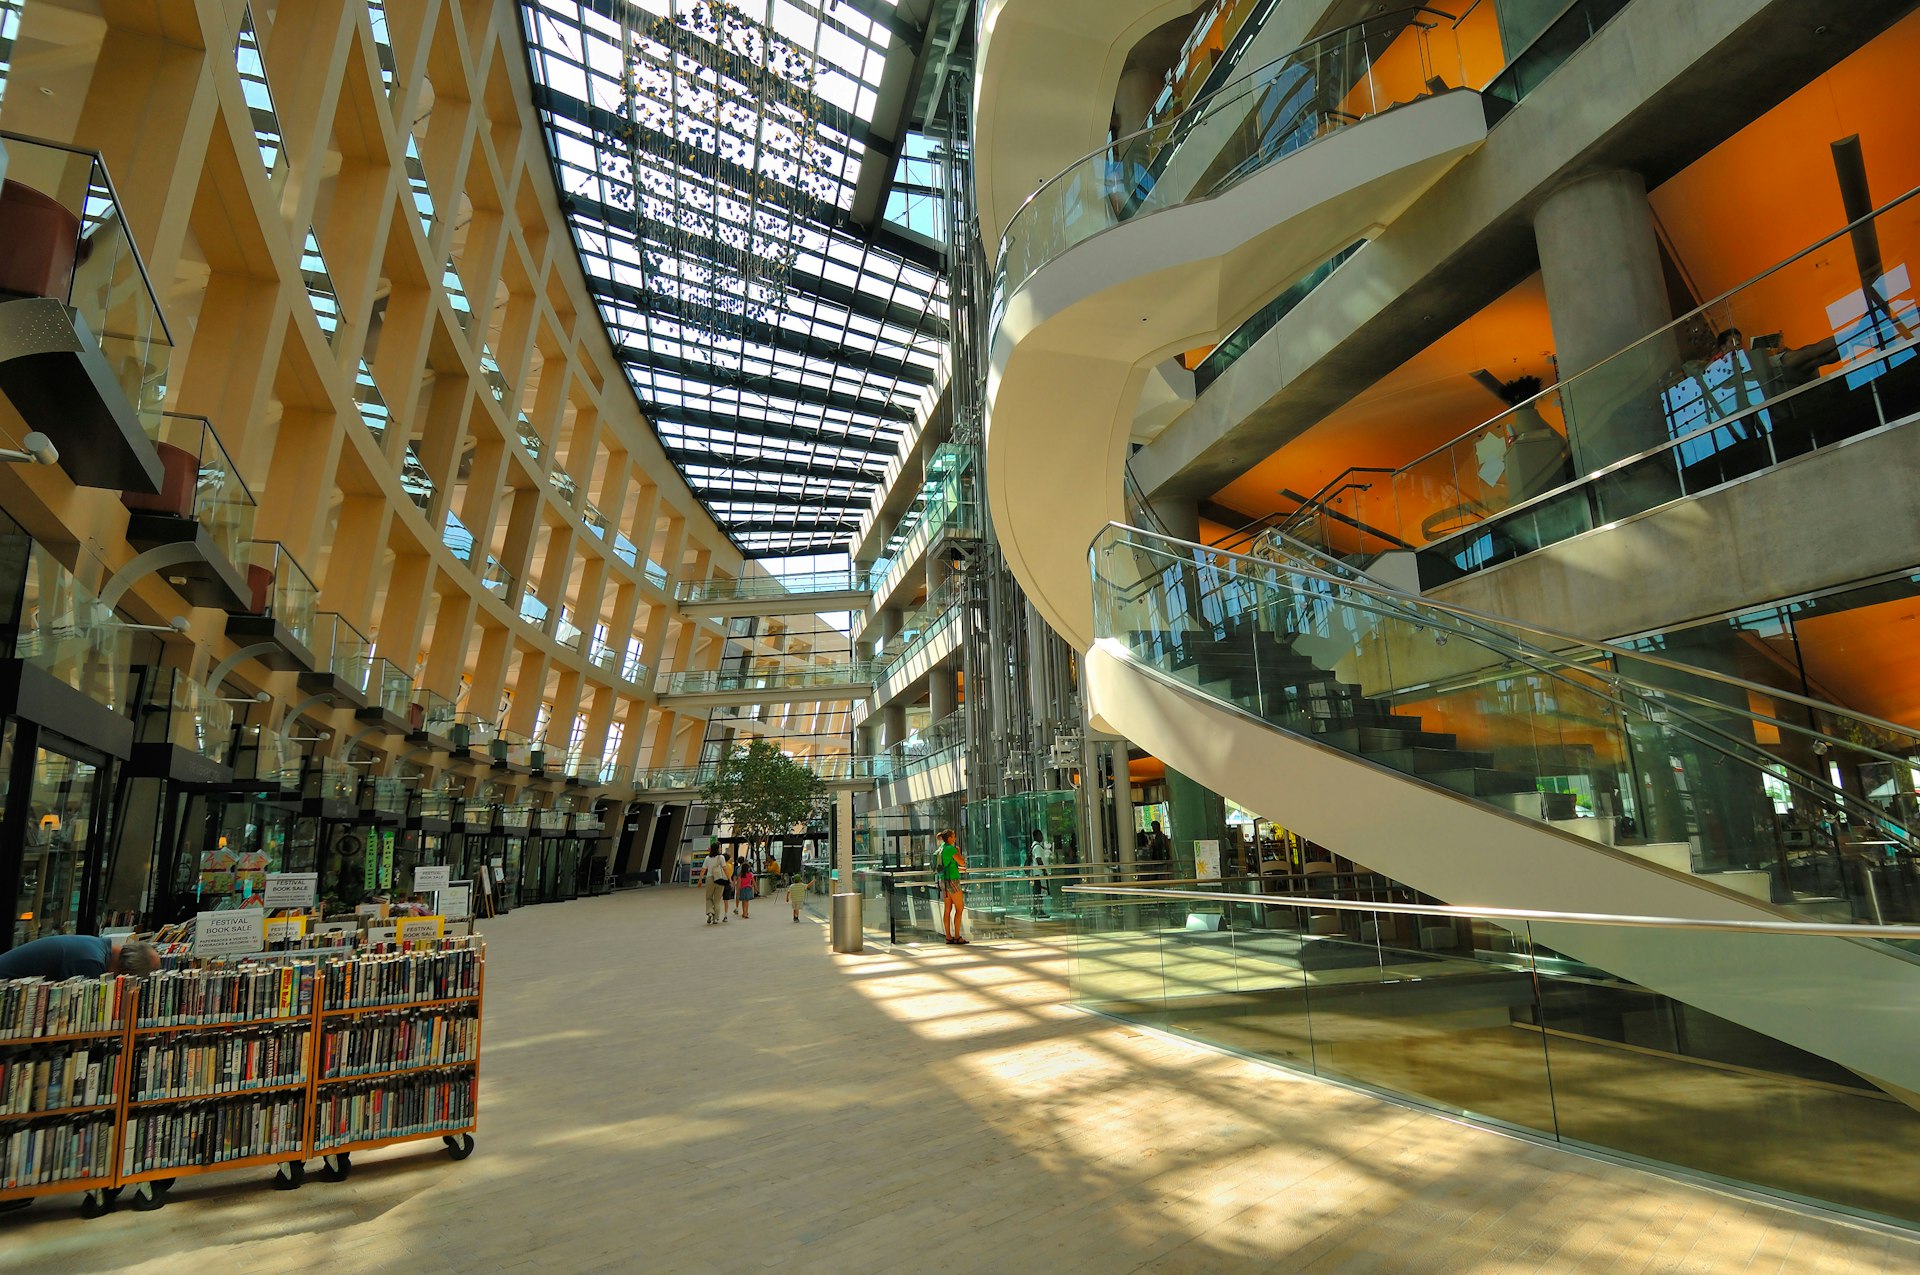 The modern atrium with stairwells, hallways and racks of books at Salt Lake City Public Library